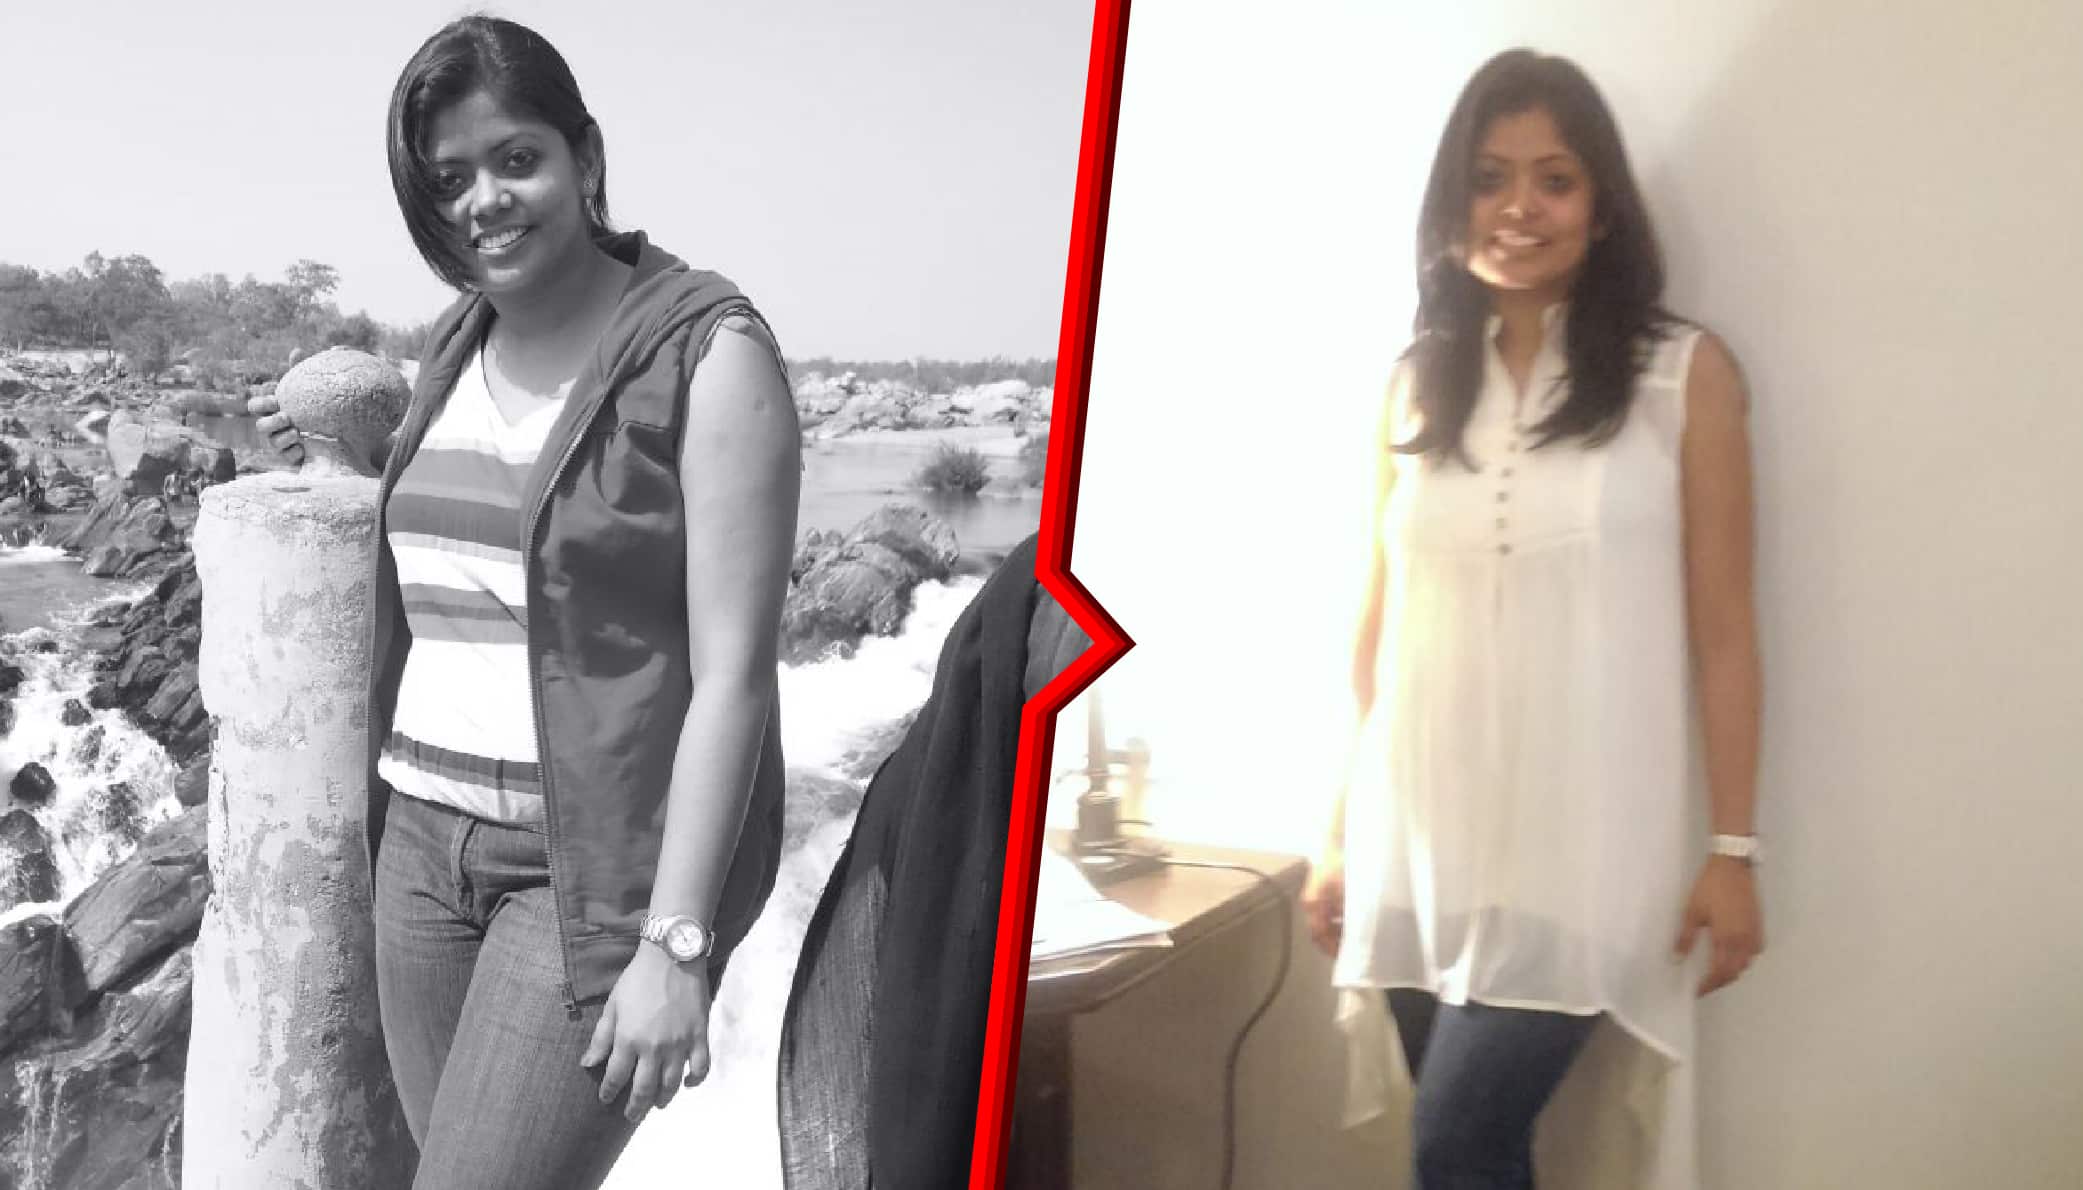 HealthifyMe effect: A loss of 11 kg